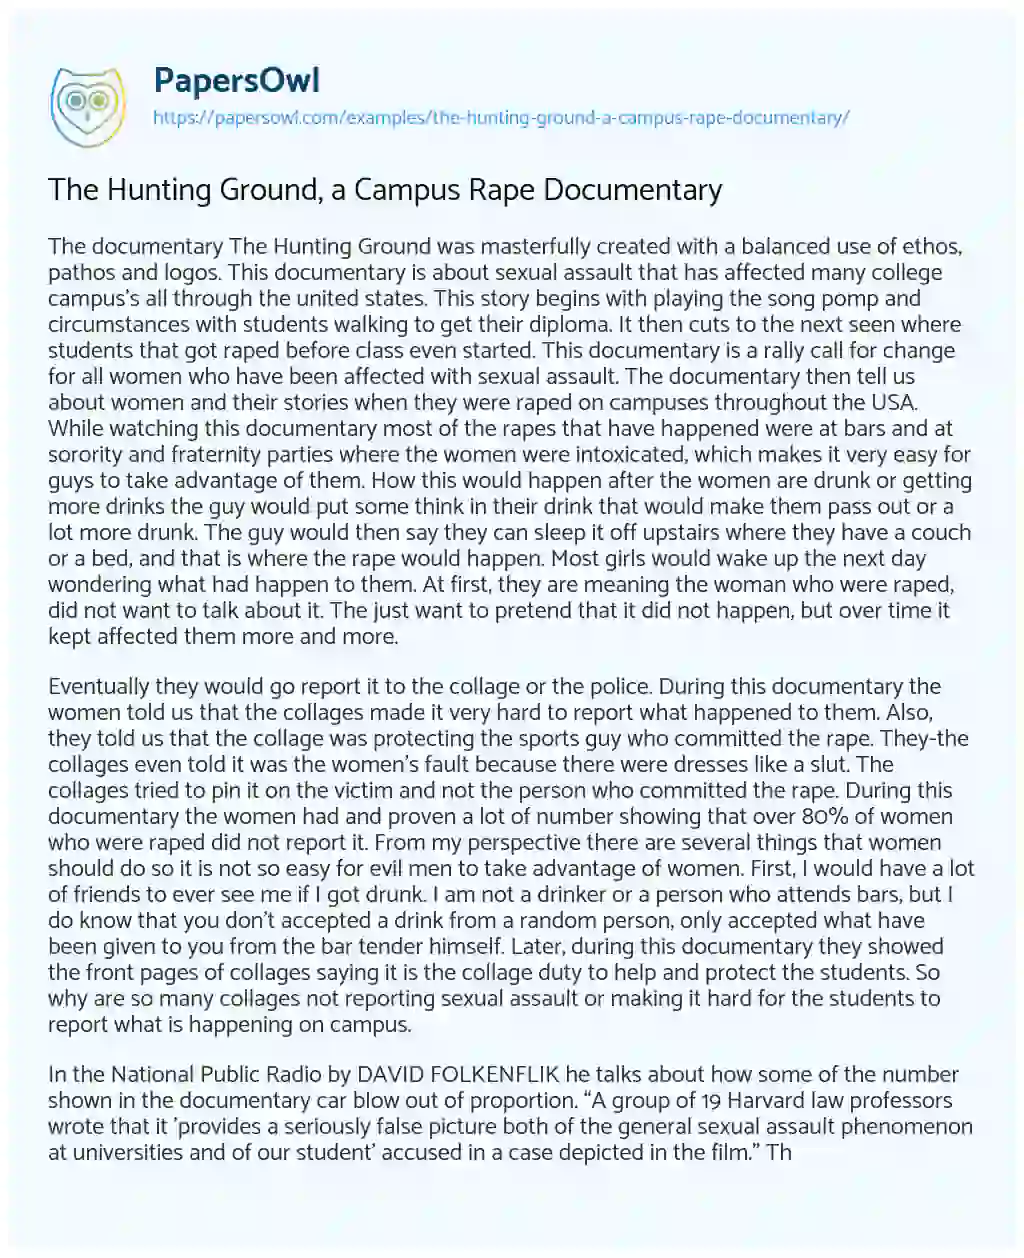 Essay on The Hunting Ground, a Campus Rape Documentary